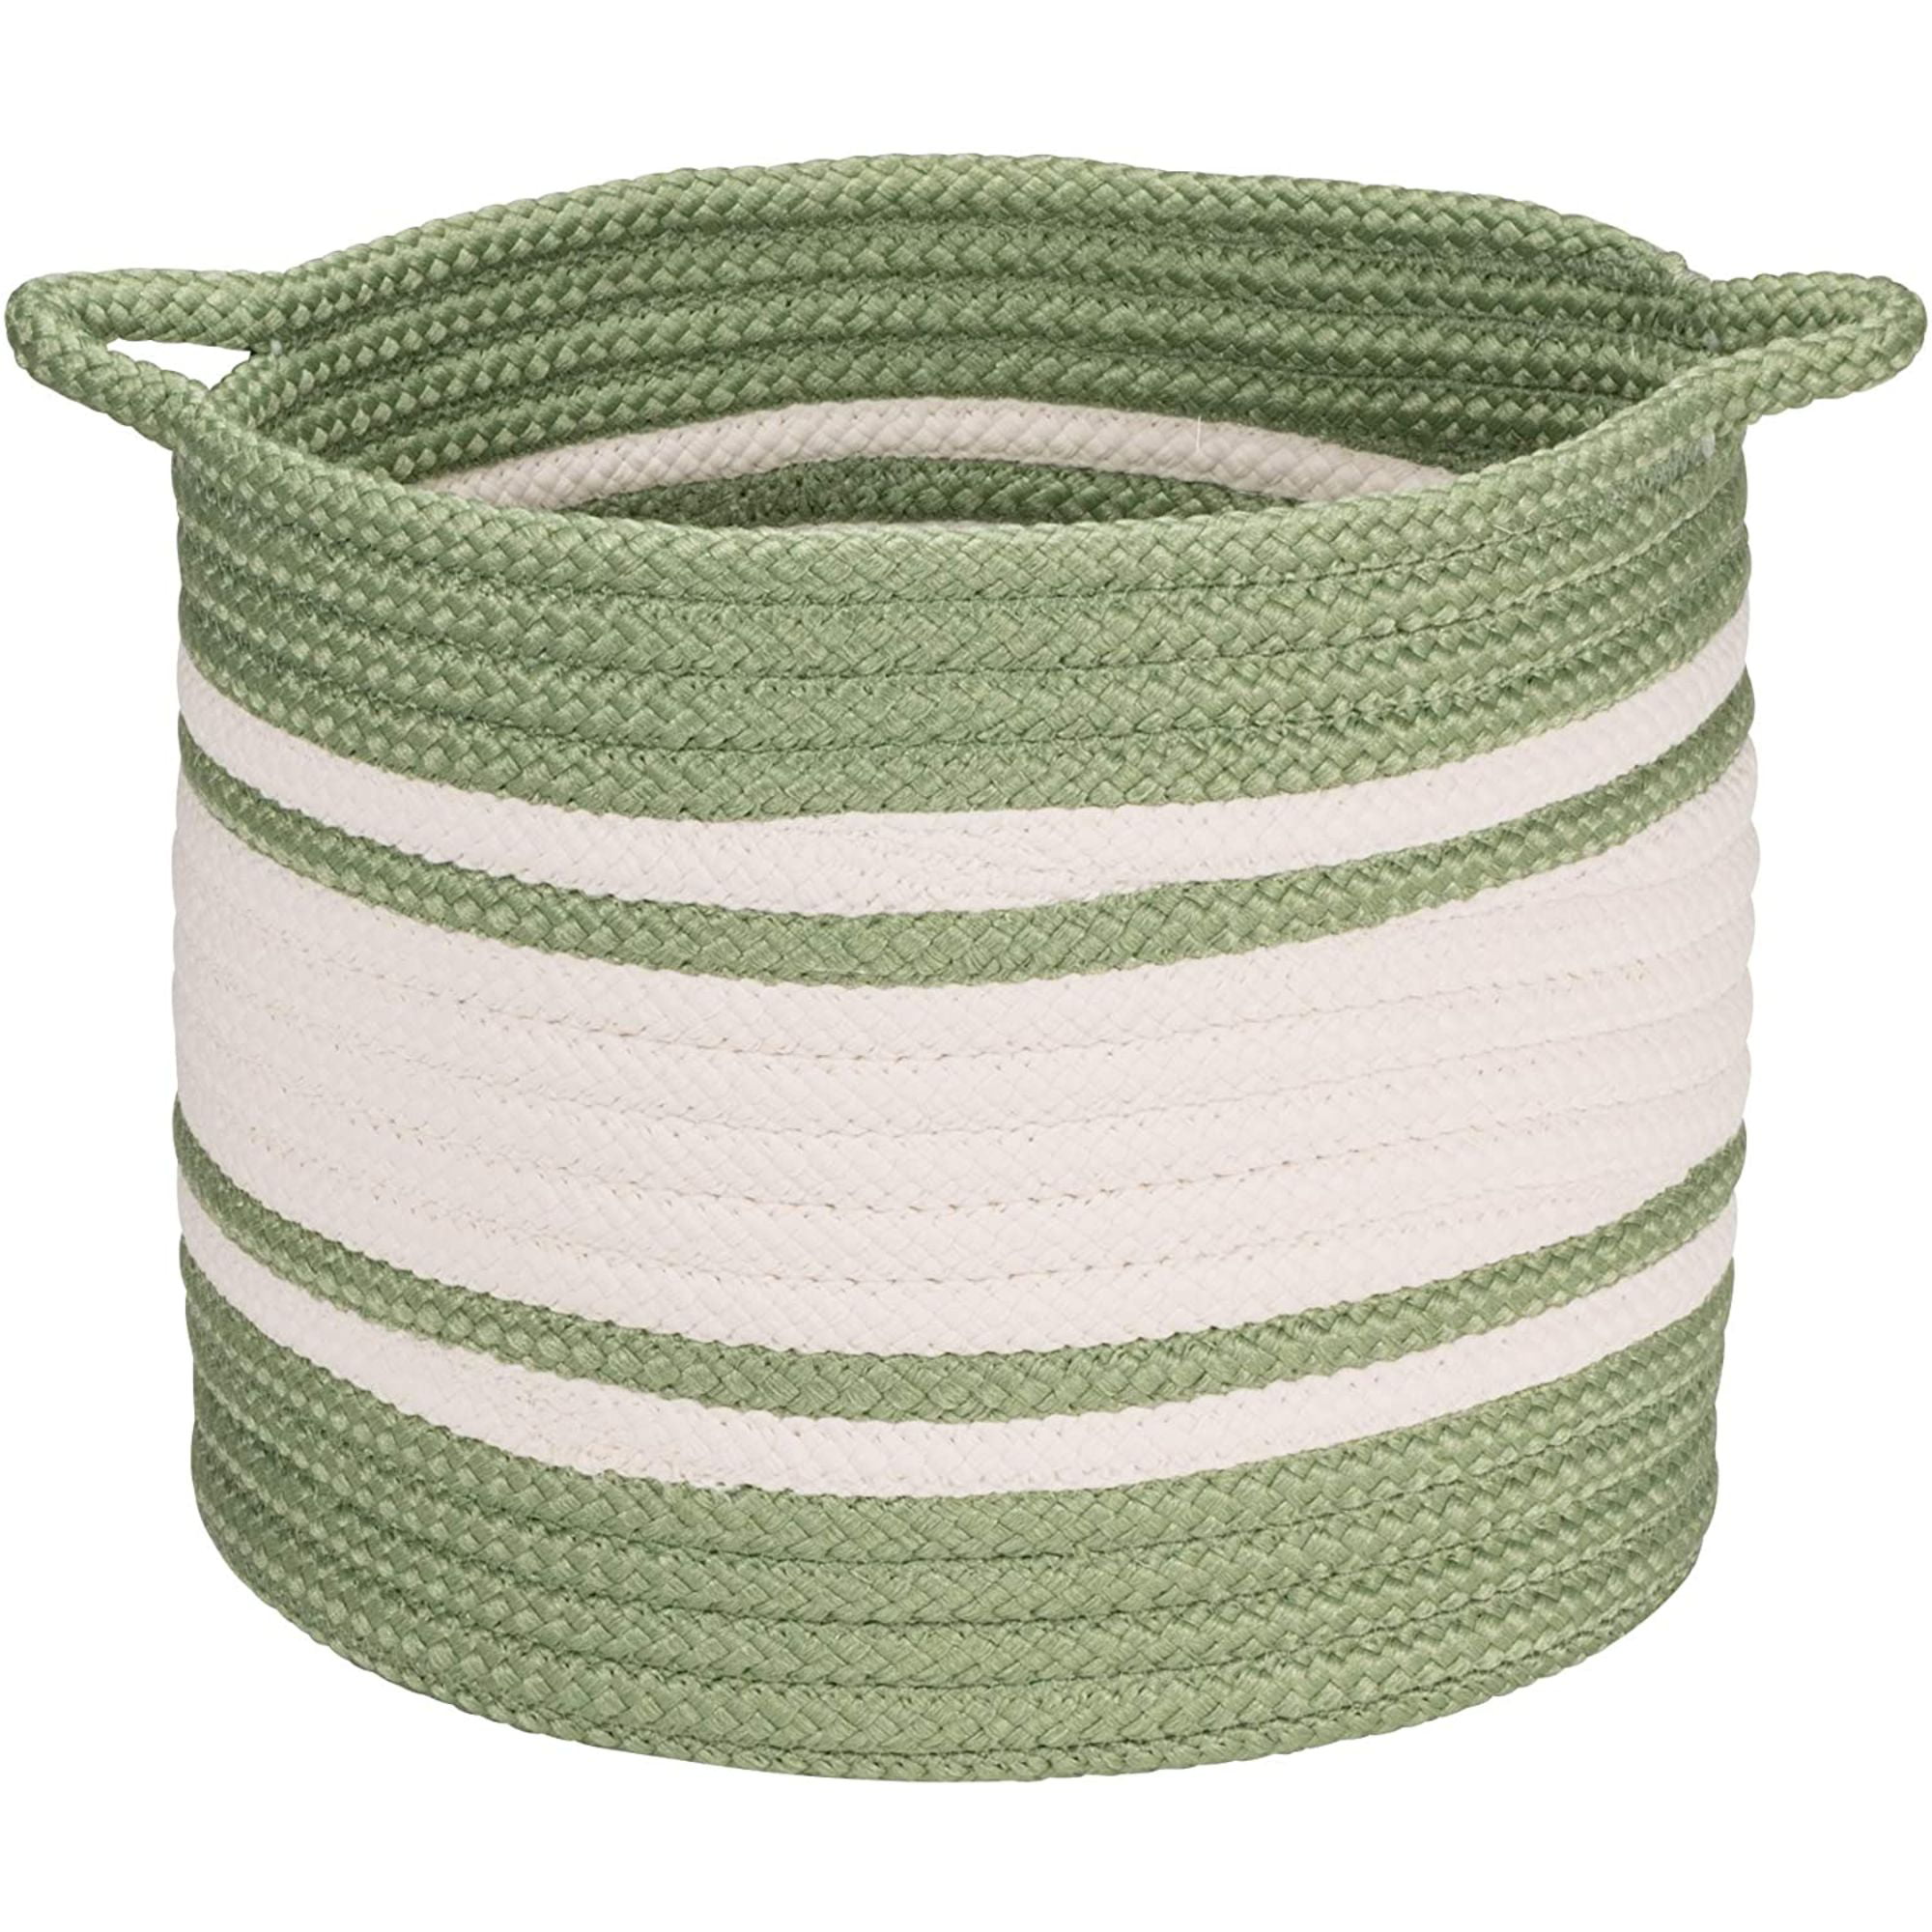 Colonia Mills Bs63 Outland Basket, Green - 20 X 20 X 18 In.